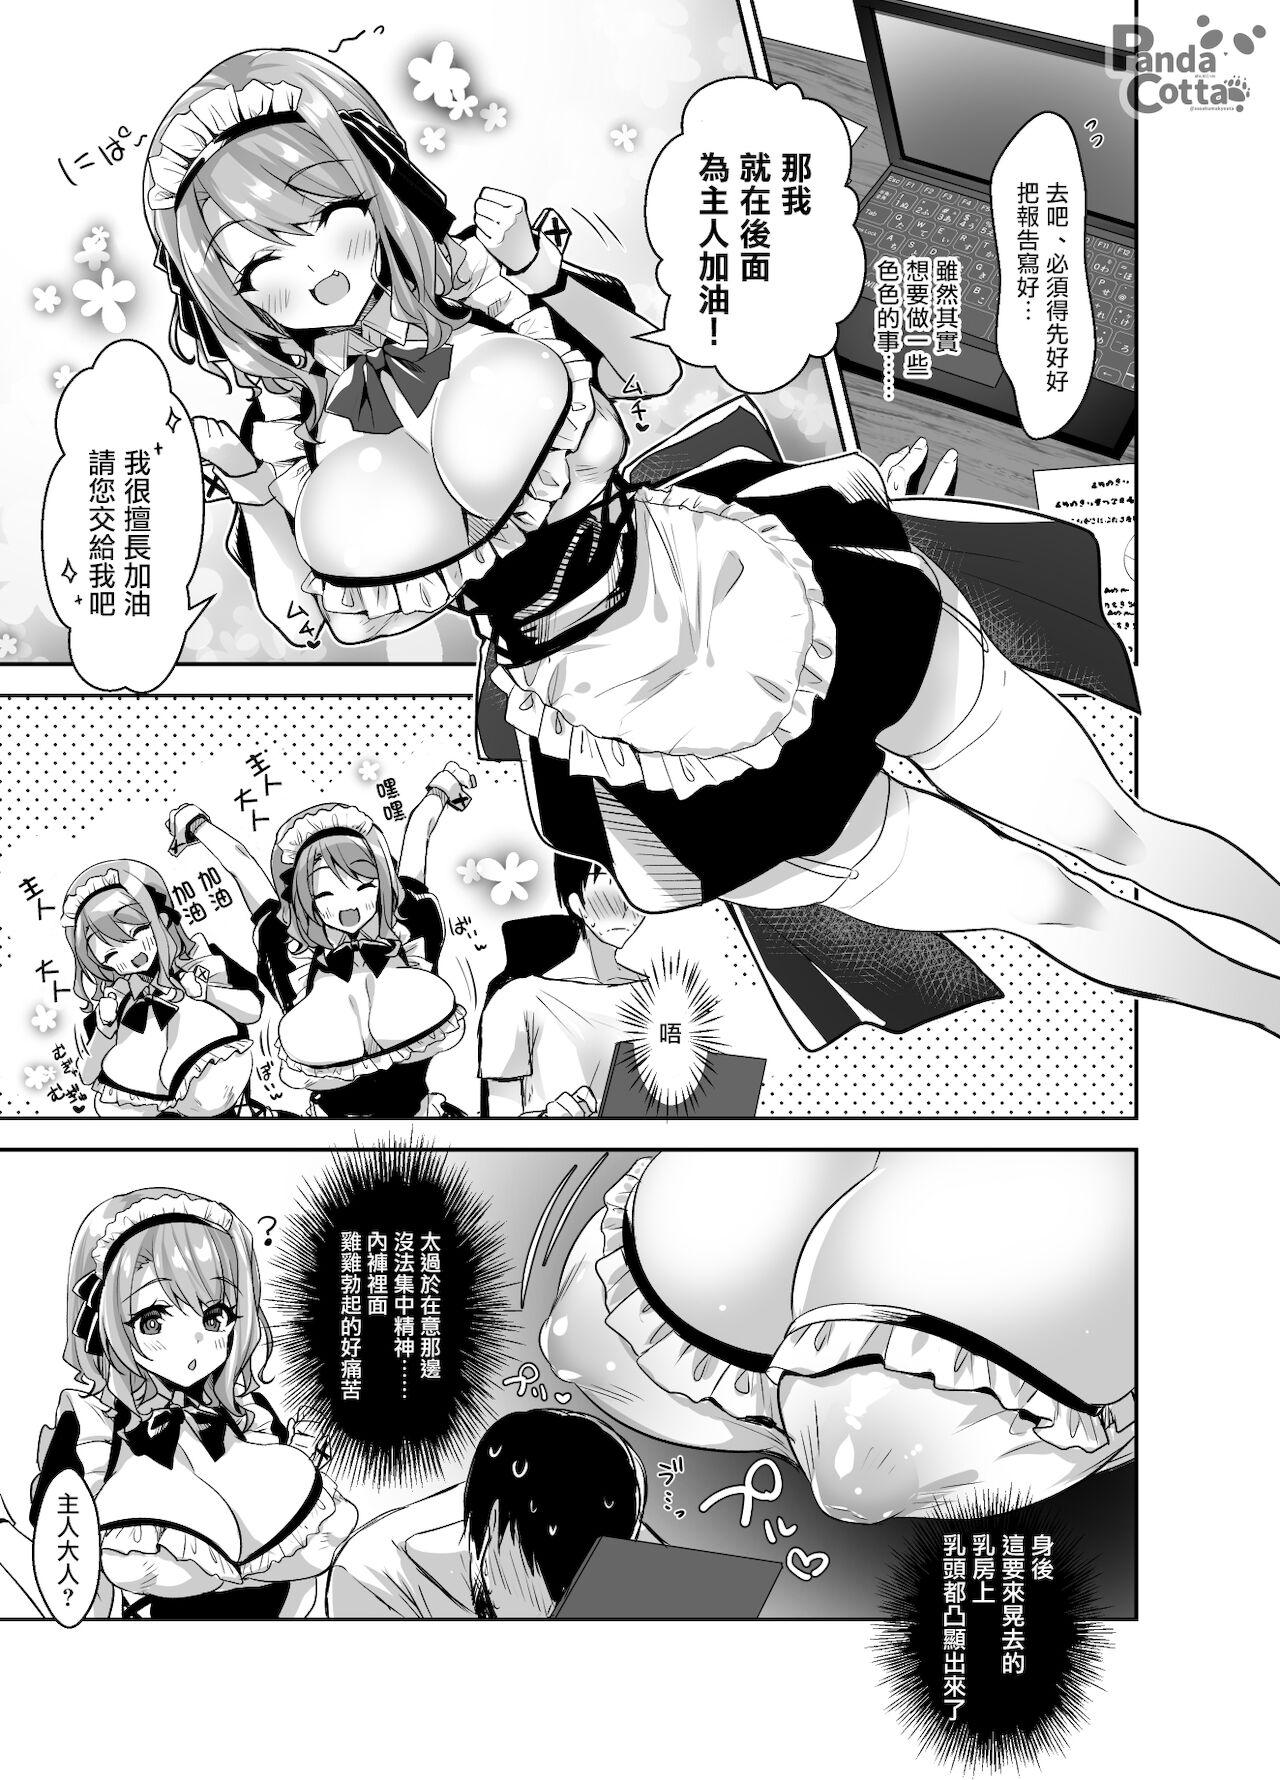 Oppai Maid Delivery 8